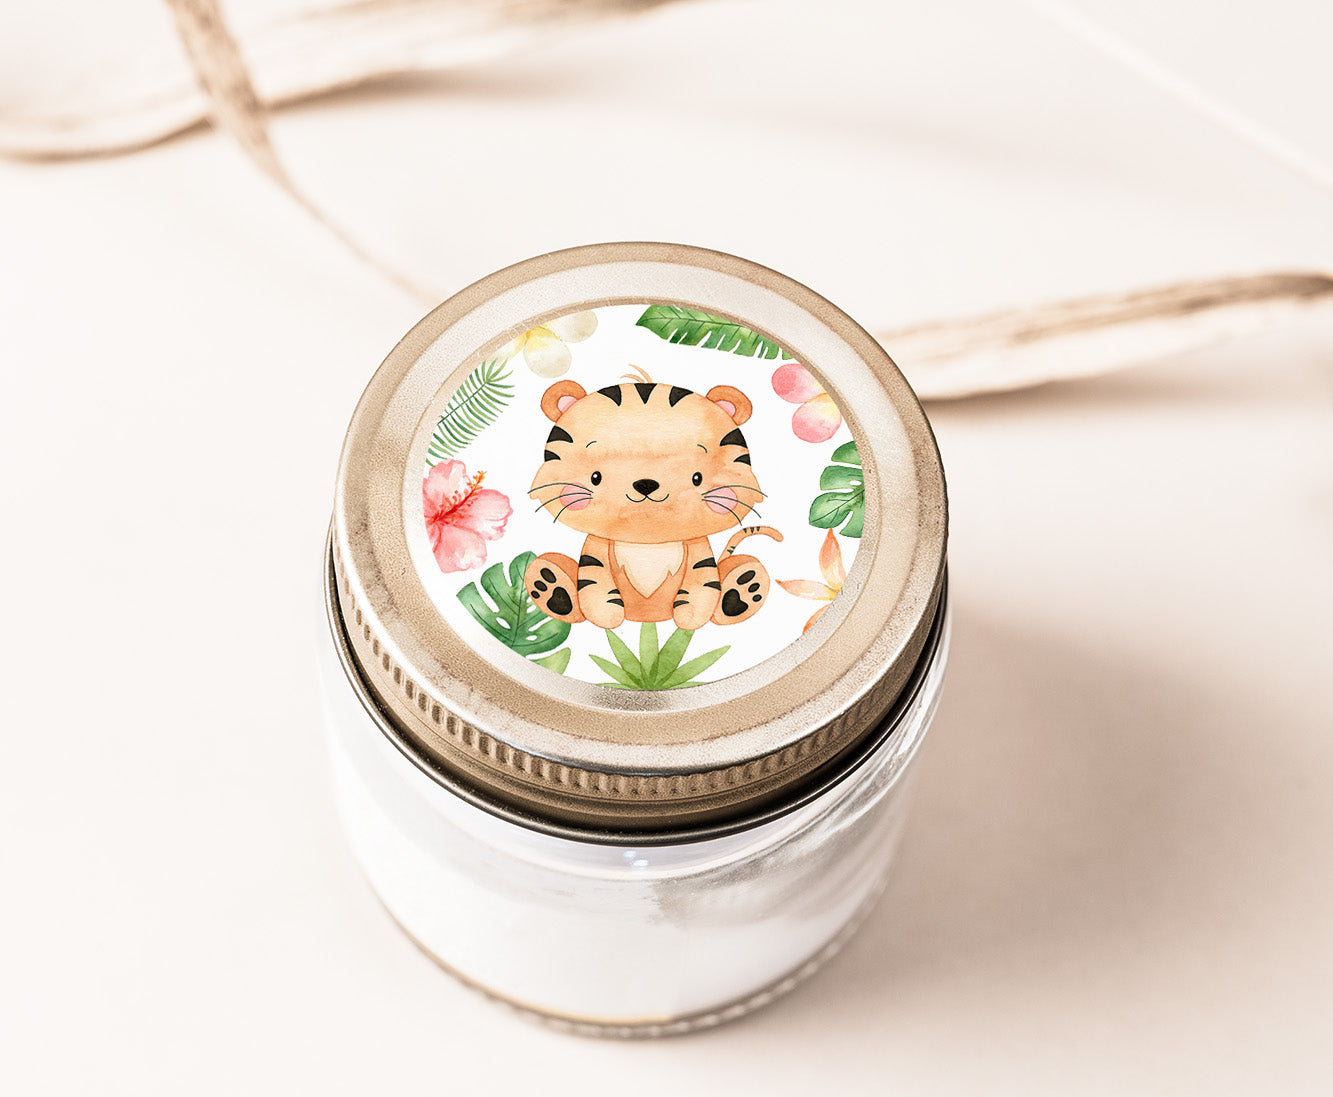 Girl Tiger Cupcake Toppers | Safari Themed Party Decorations - 35E